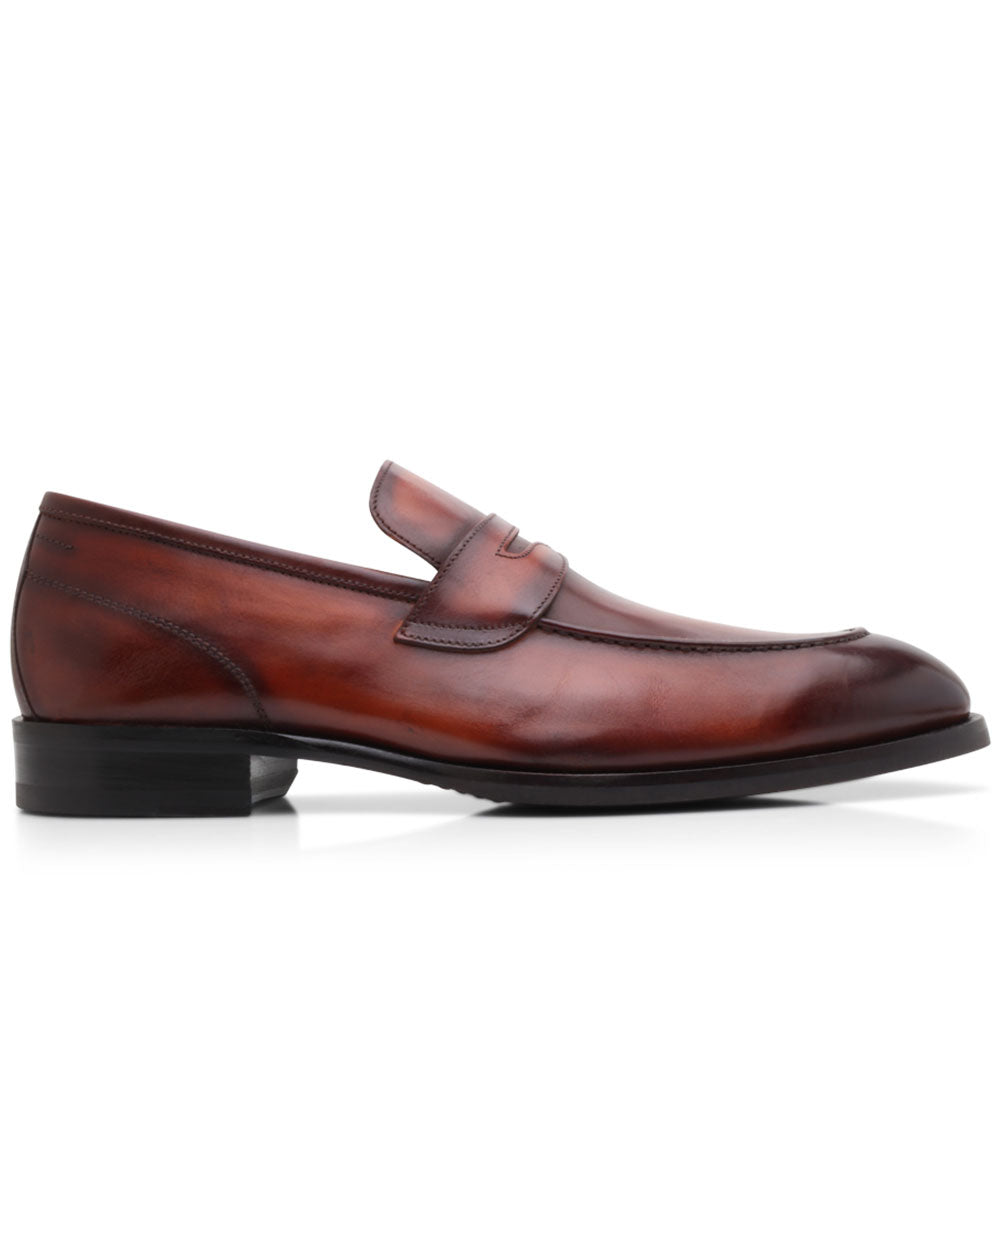 Leather Marmo Brera Penny Loafer in Chestnut